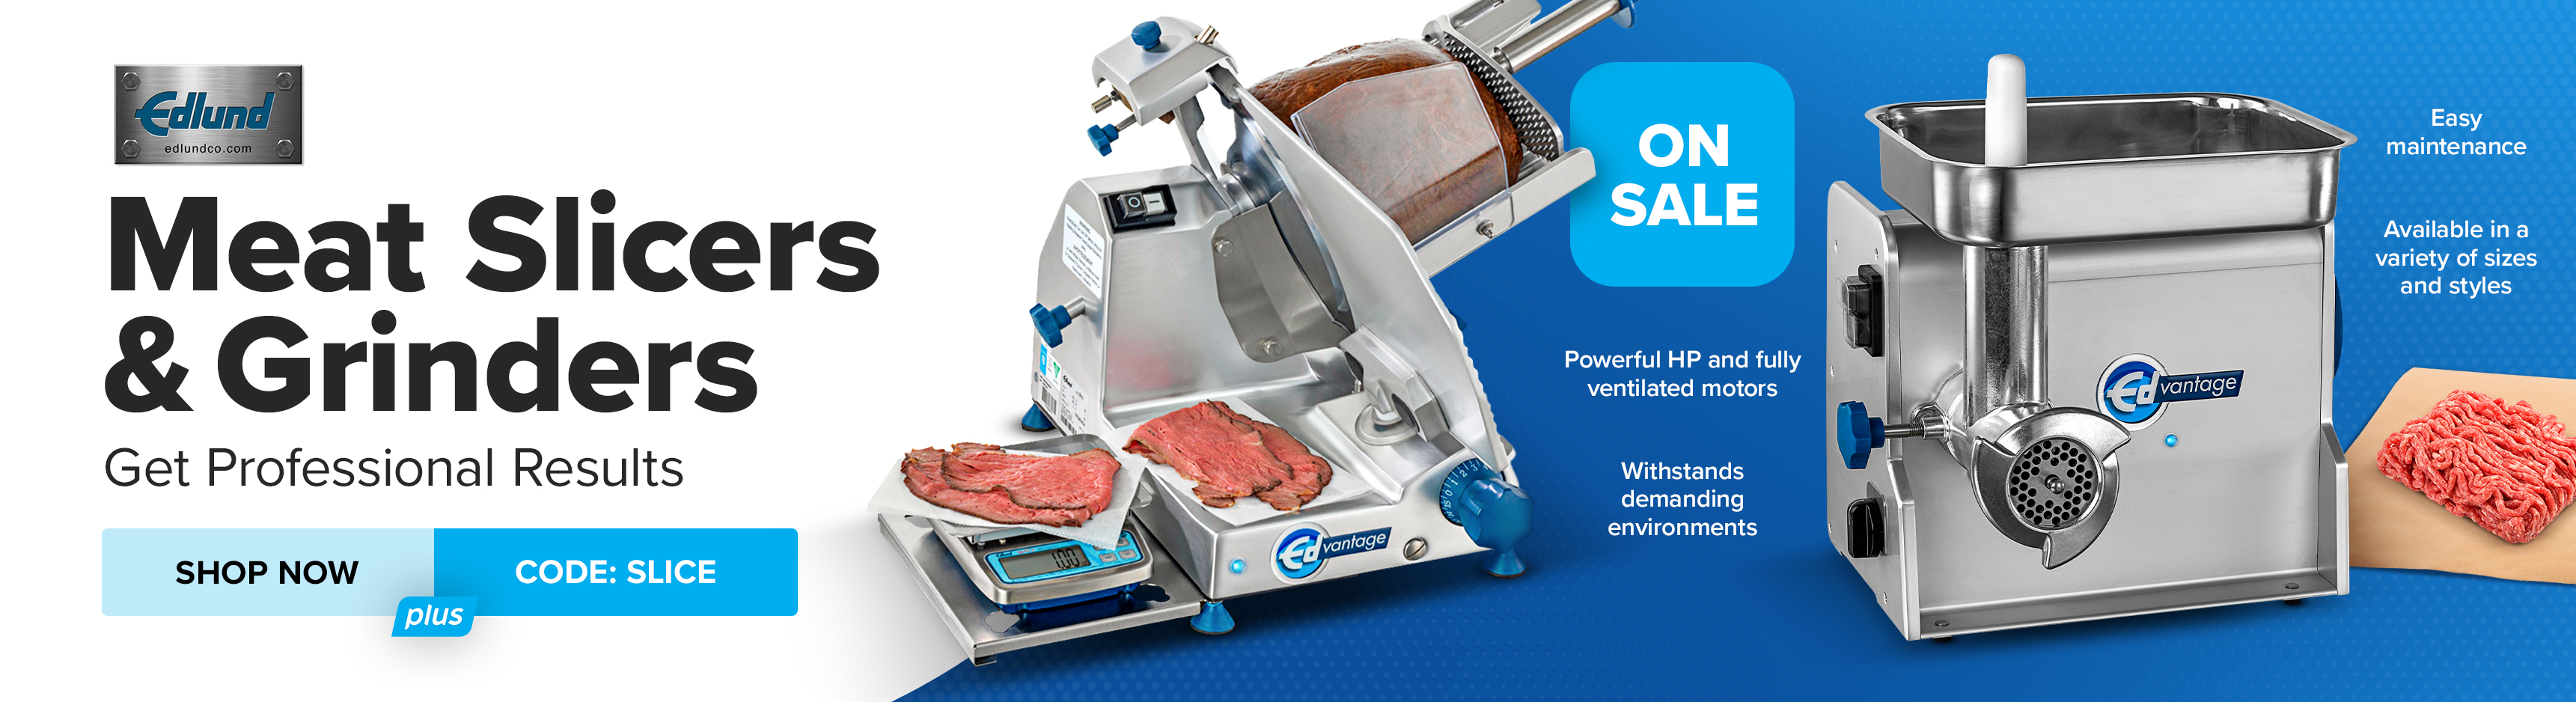 Get Professional Results with Edlund Meat Slicers & Grinders On Sale Shop Now Use Code SLICE